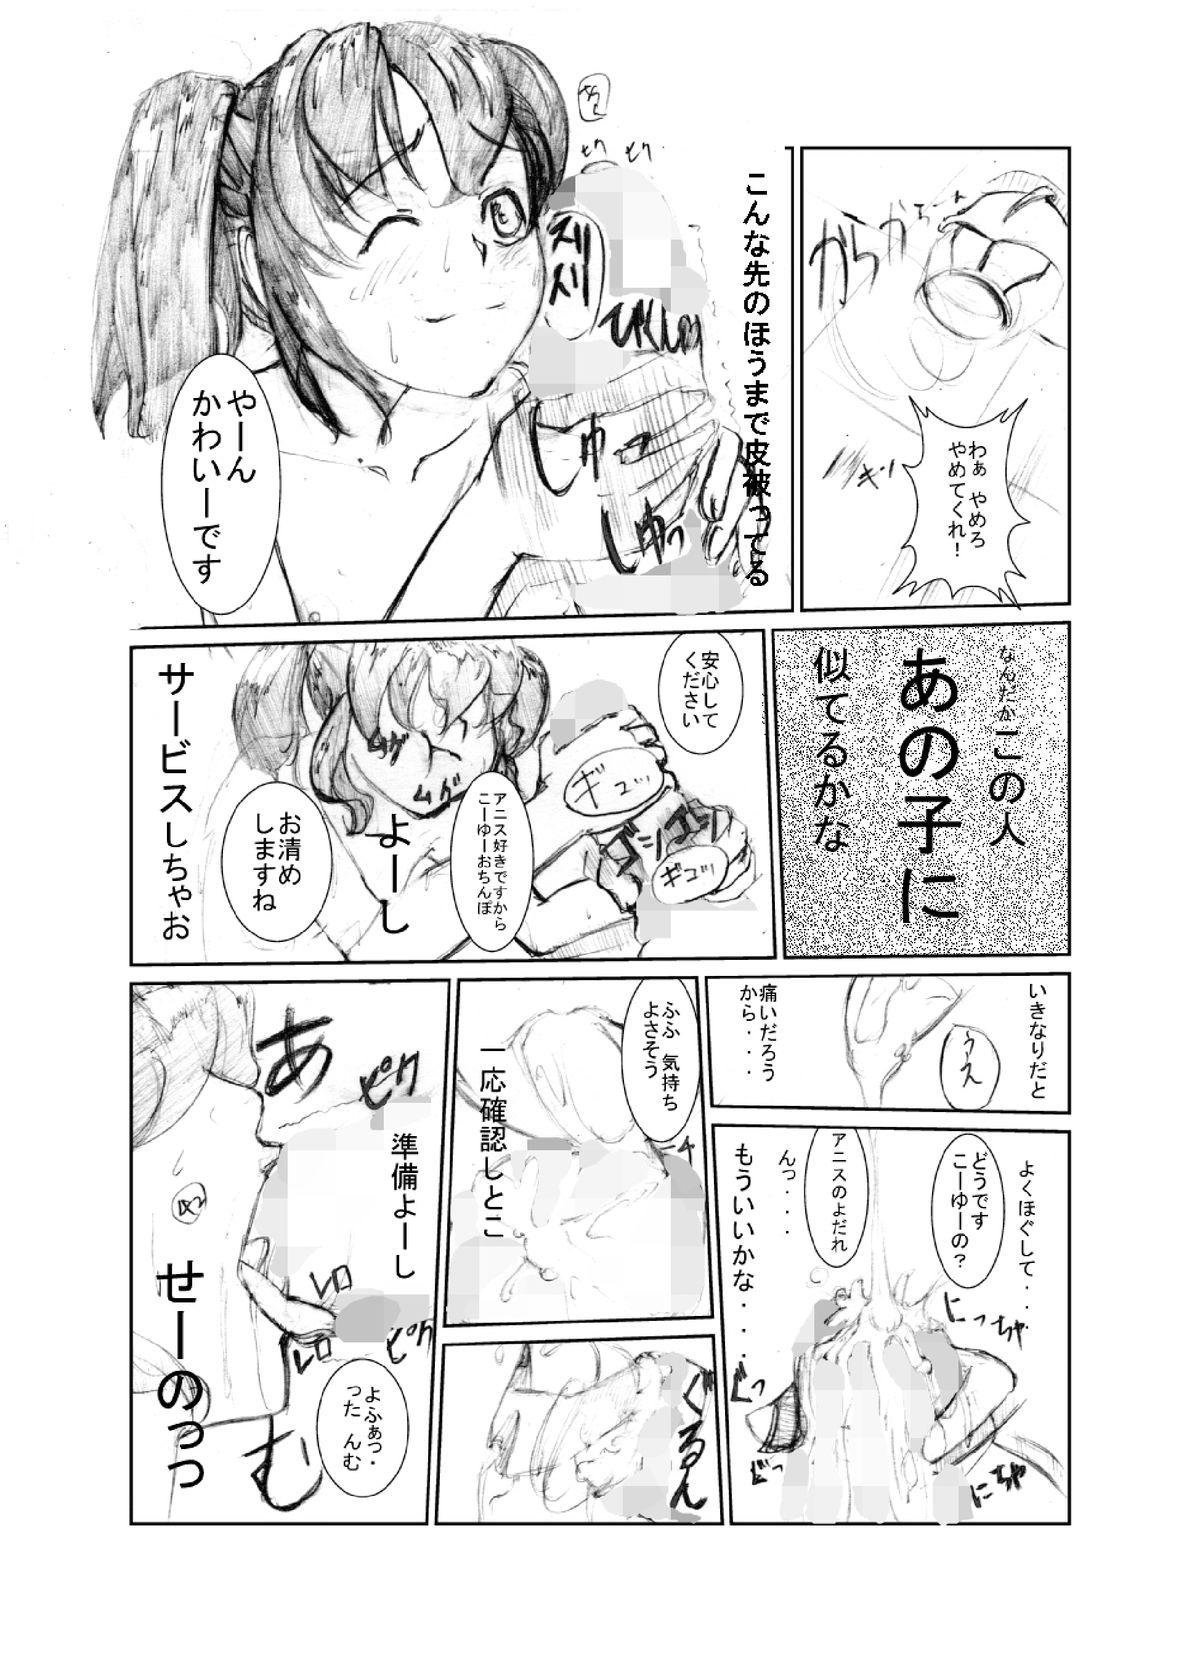 Round Ass 虹は溶けゆく 朝焼けに - Tales of the abyss Gordita - Page 11